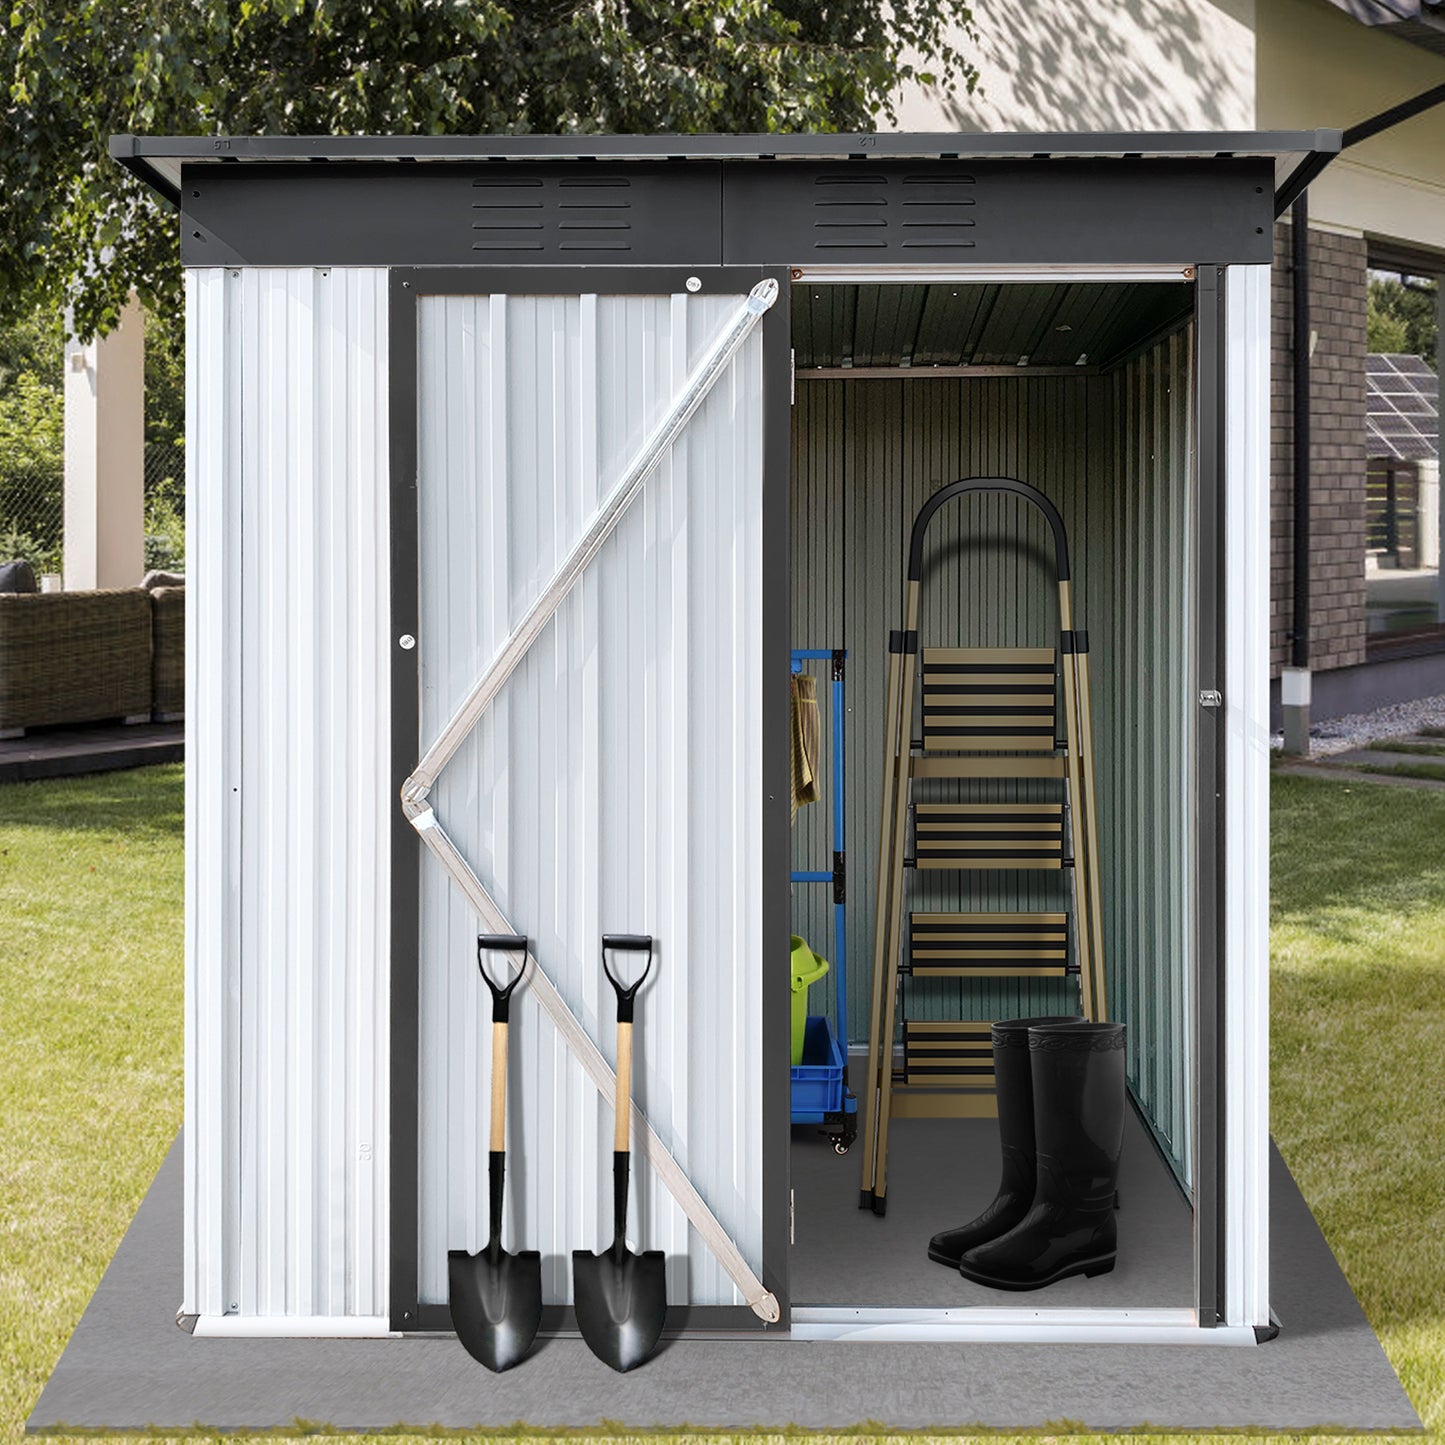 5' x 3' Outdoor Metal Storage Shed, Garden Shed for Tools, Trash Can, Storage Shed with Single Lockable Door, for Backyard, Patio, Lawn, C29